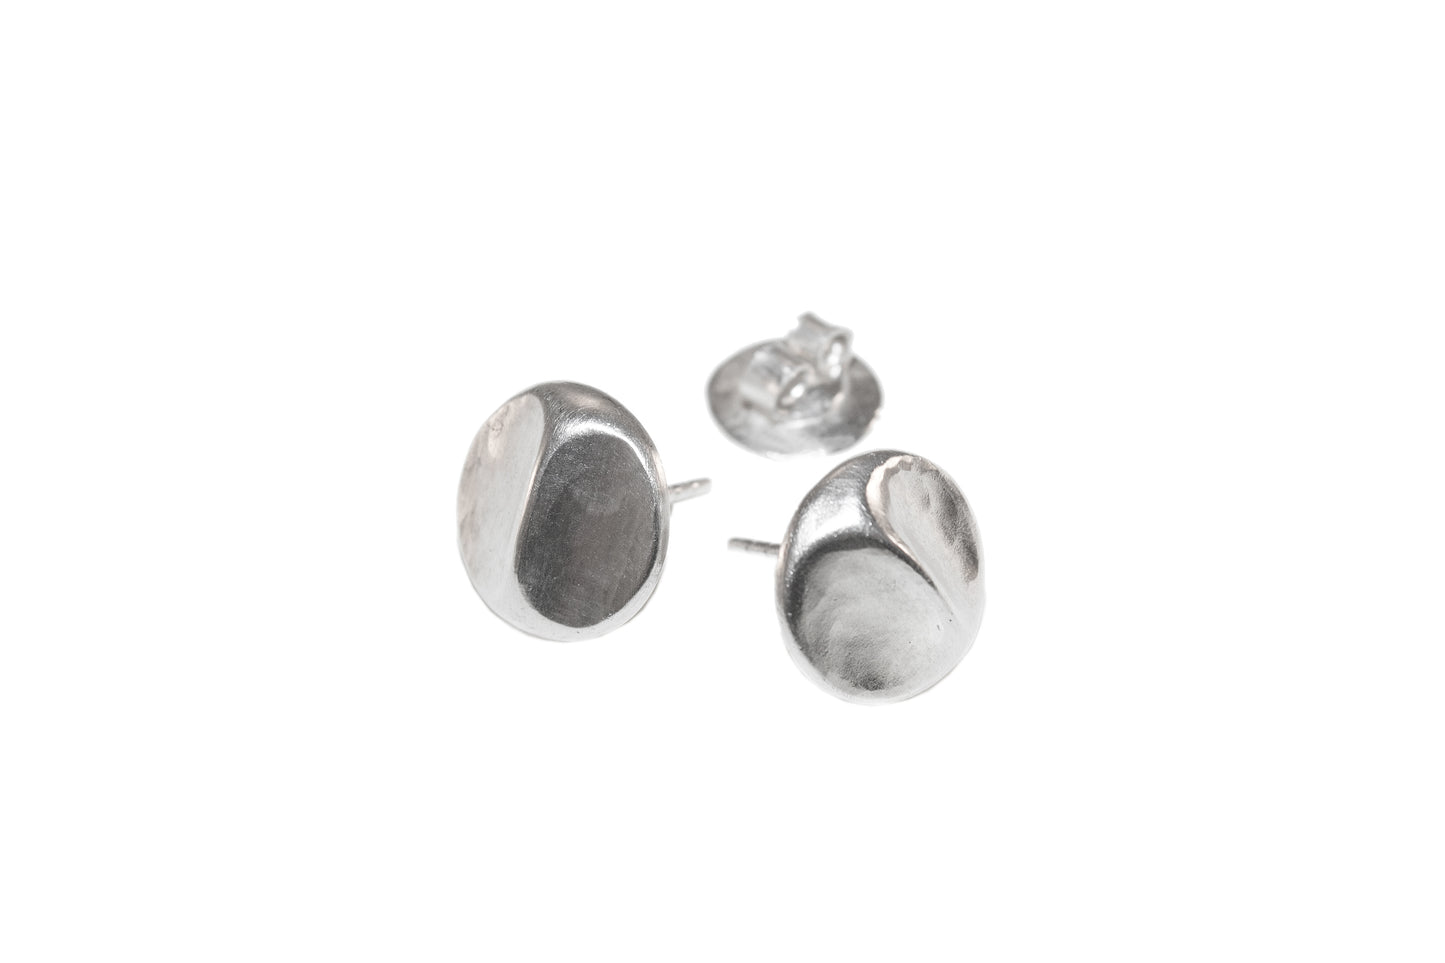 A071.8 Forged Round Small Earrings